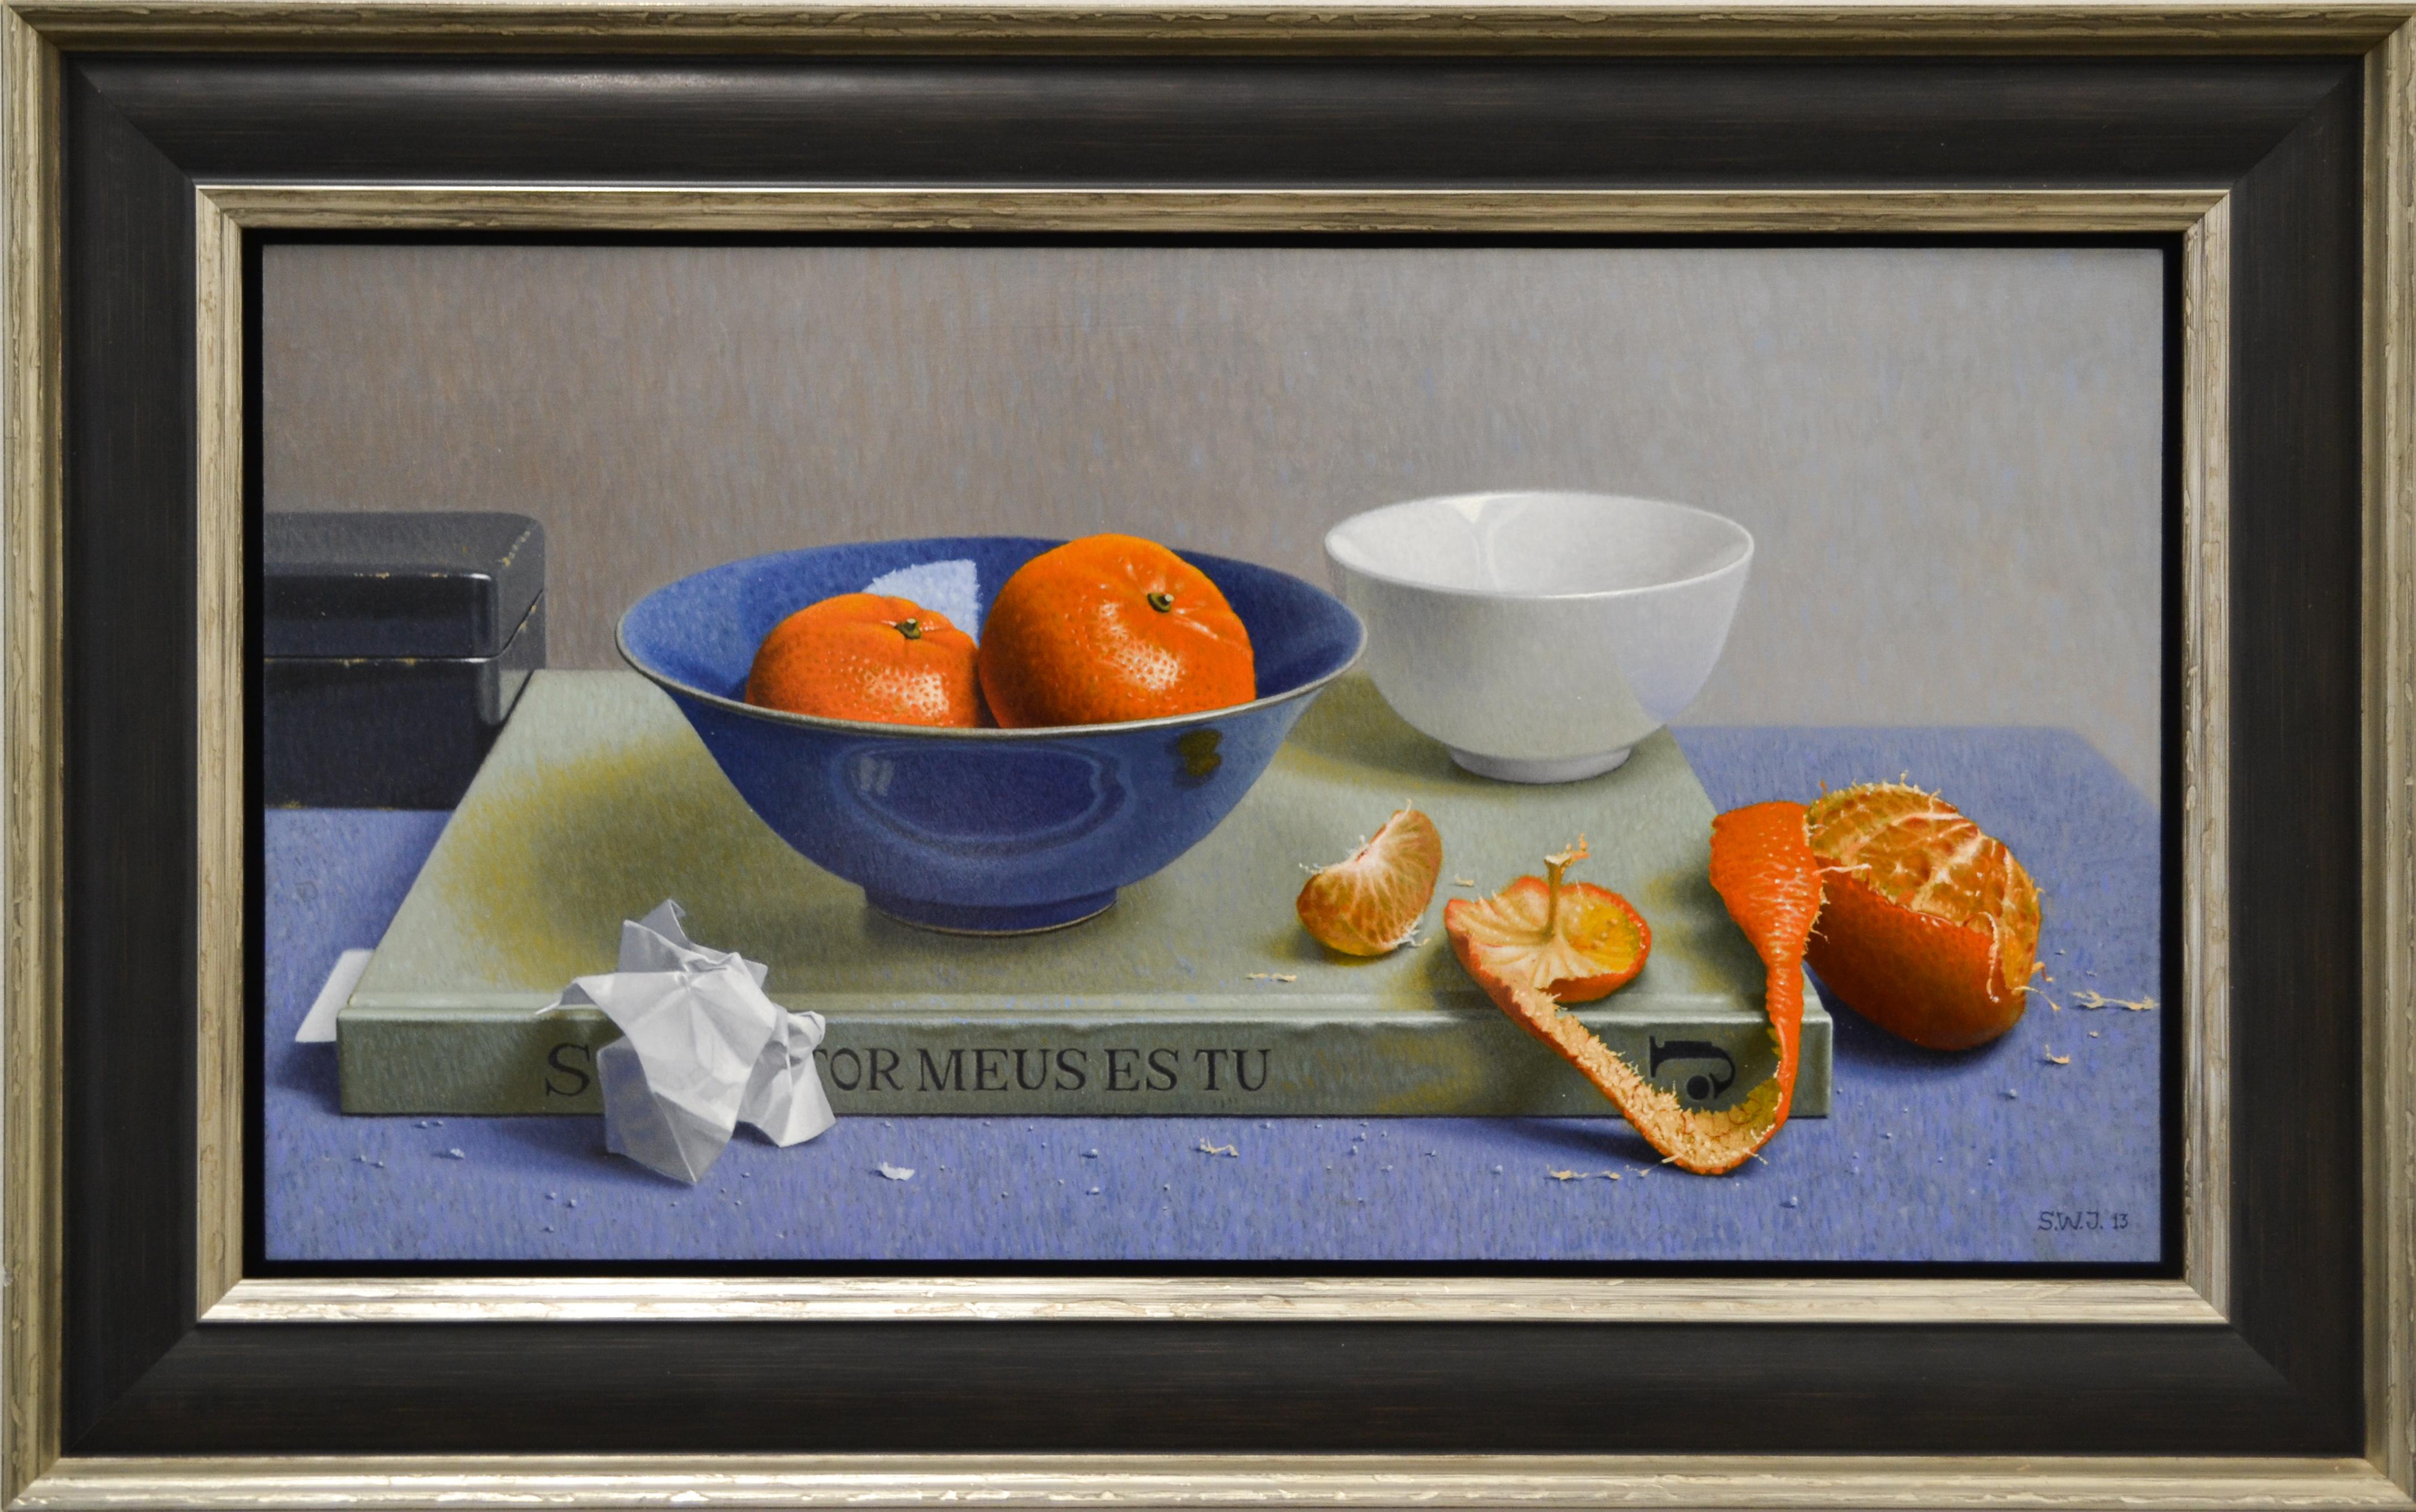 Since August 2018 Sietse W. Jonker belongs to the group of artists that we permanently represent in our stock-exposition. In mid-2019, this still-life artist will take part in a group exhibition devoted to still life in painting. His work can be